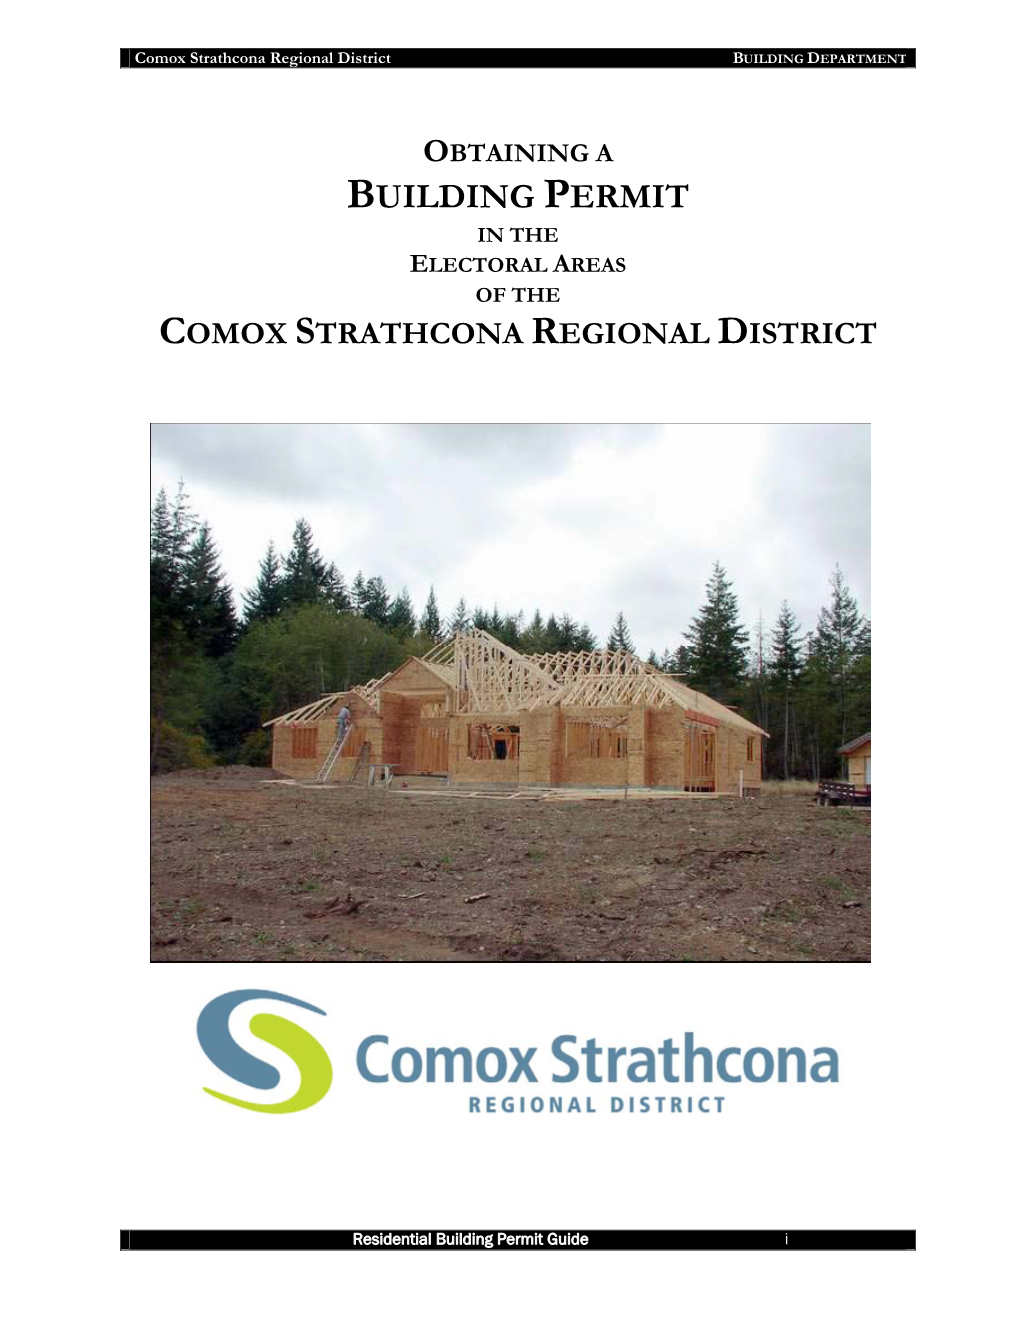 Obtaining a Building Permit in the Electoral Areas of the Comox Strathcona Regional District